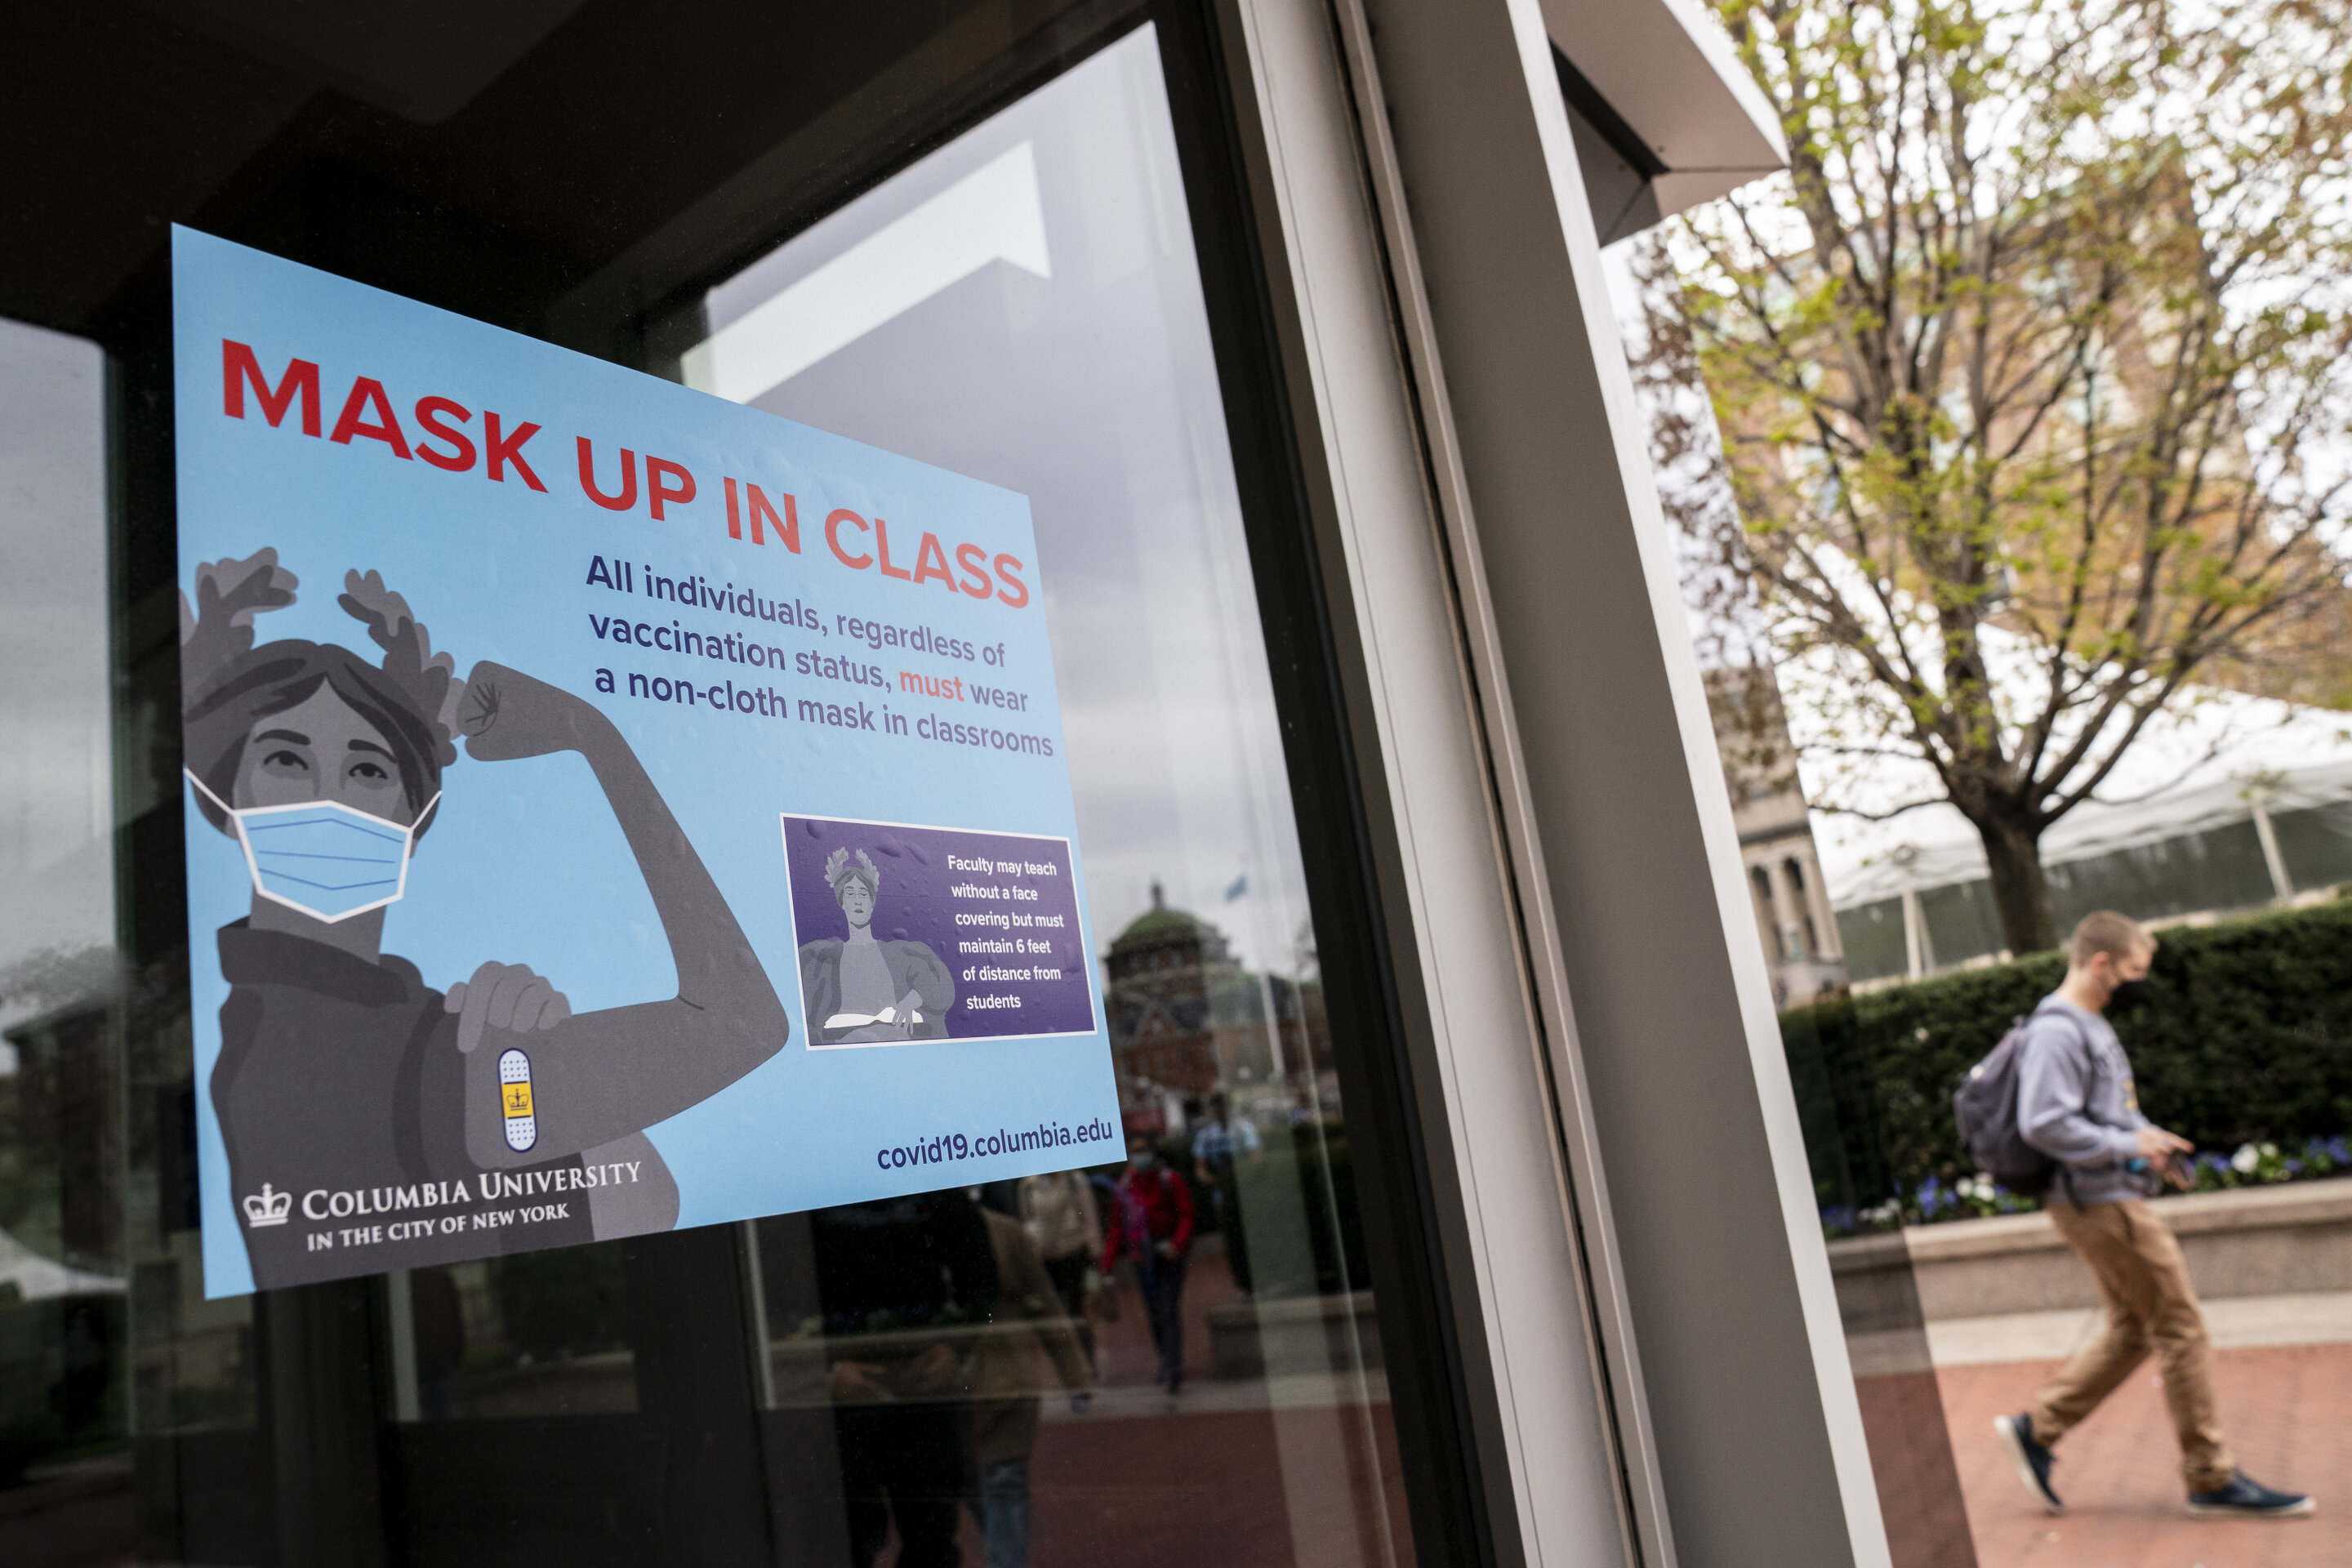 #Mask mandates return to US college campuses as cases rise